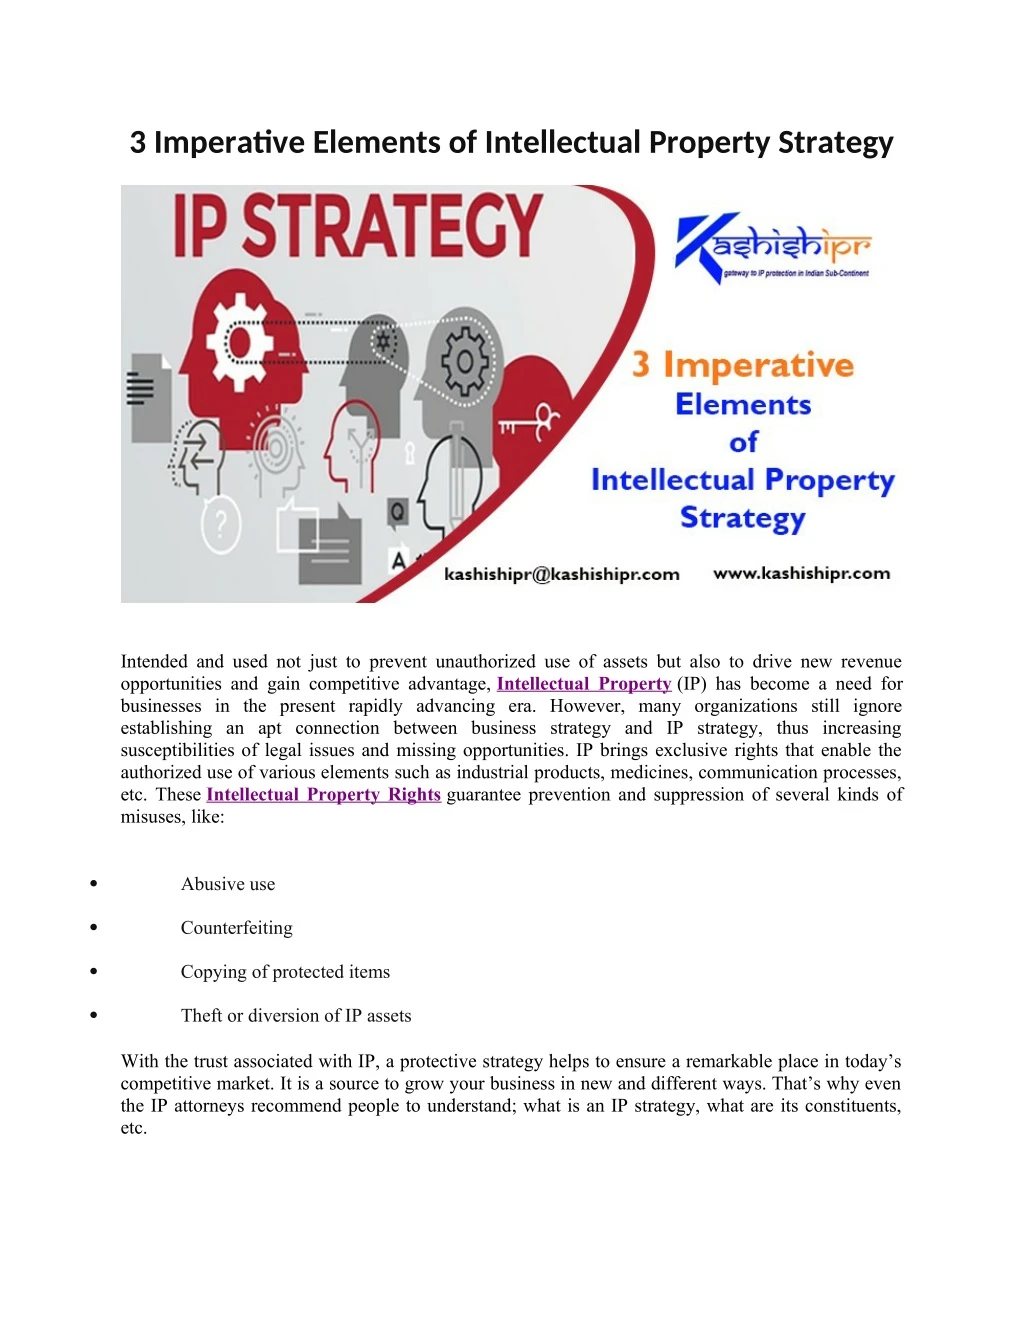 3 imperative elements of intellectual property